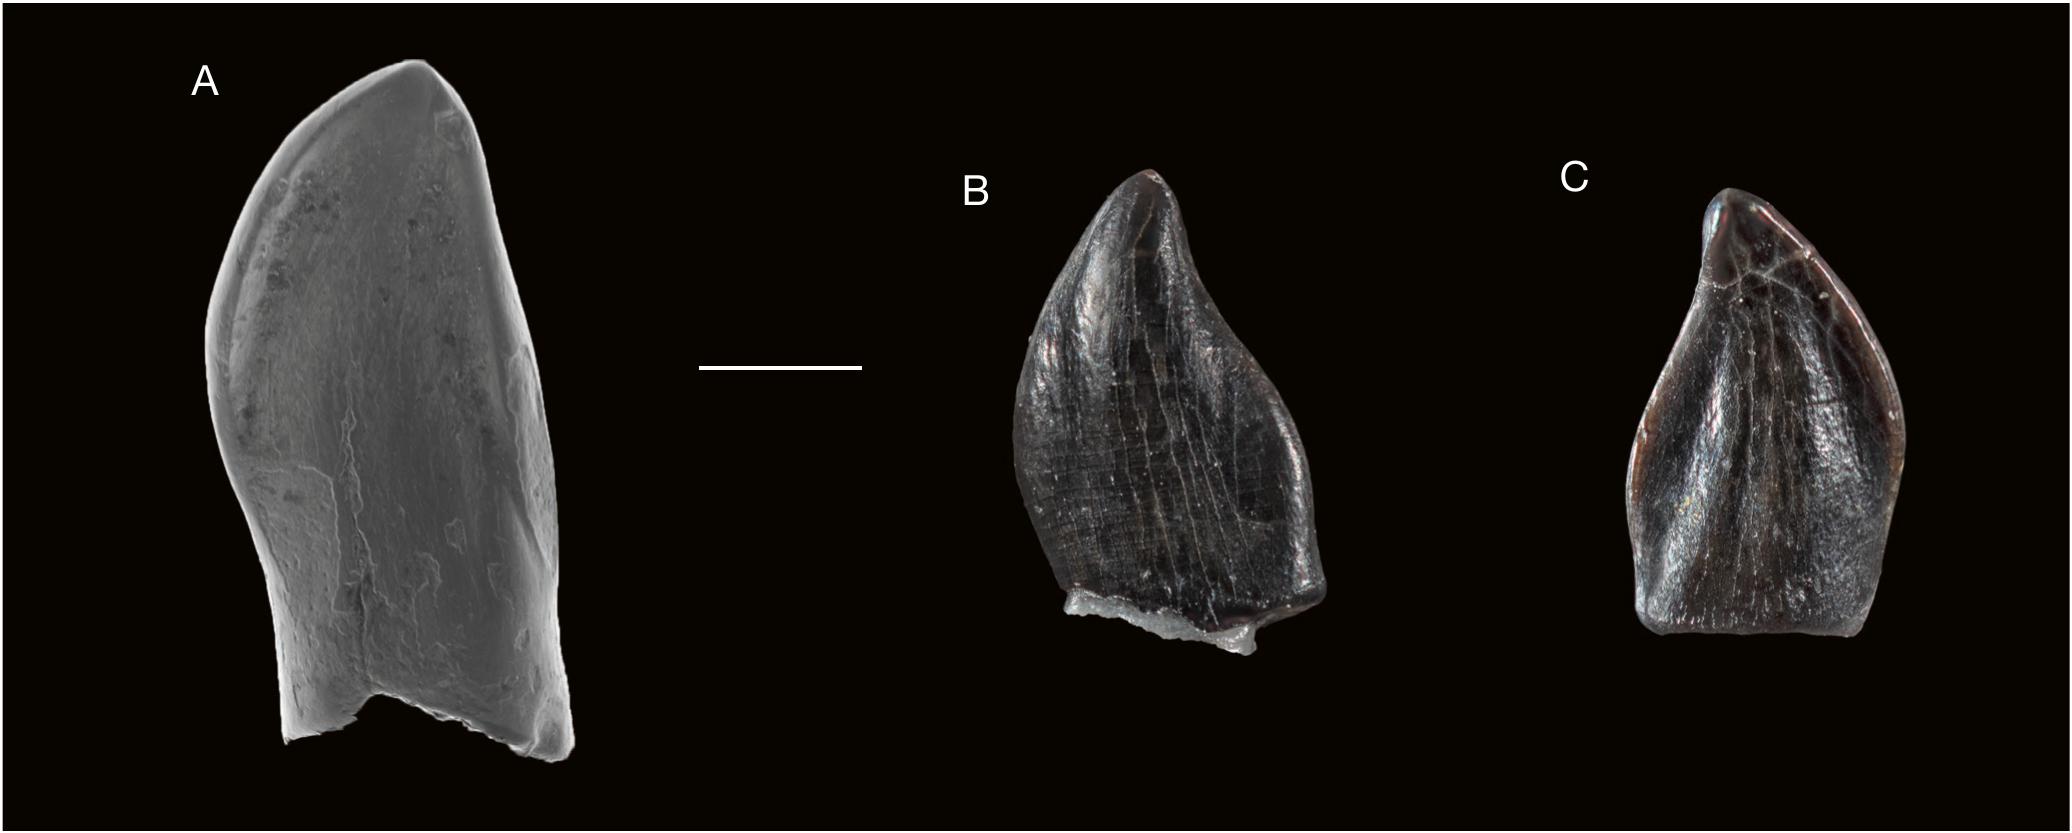 Pterosaur teeth from Angeac-Charente: A, Pterodactyloidea indet. A